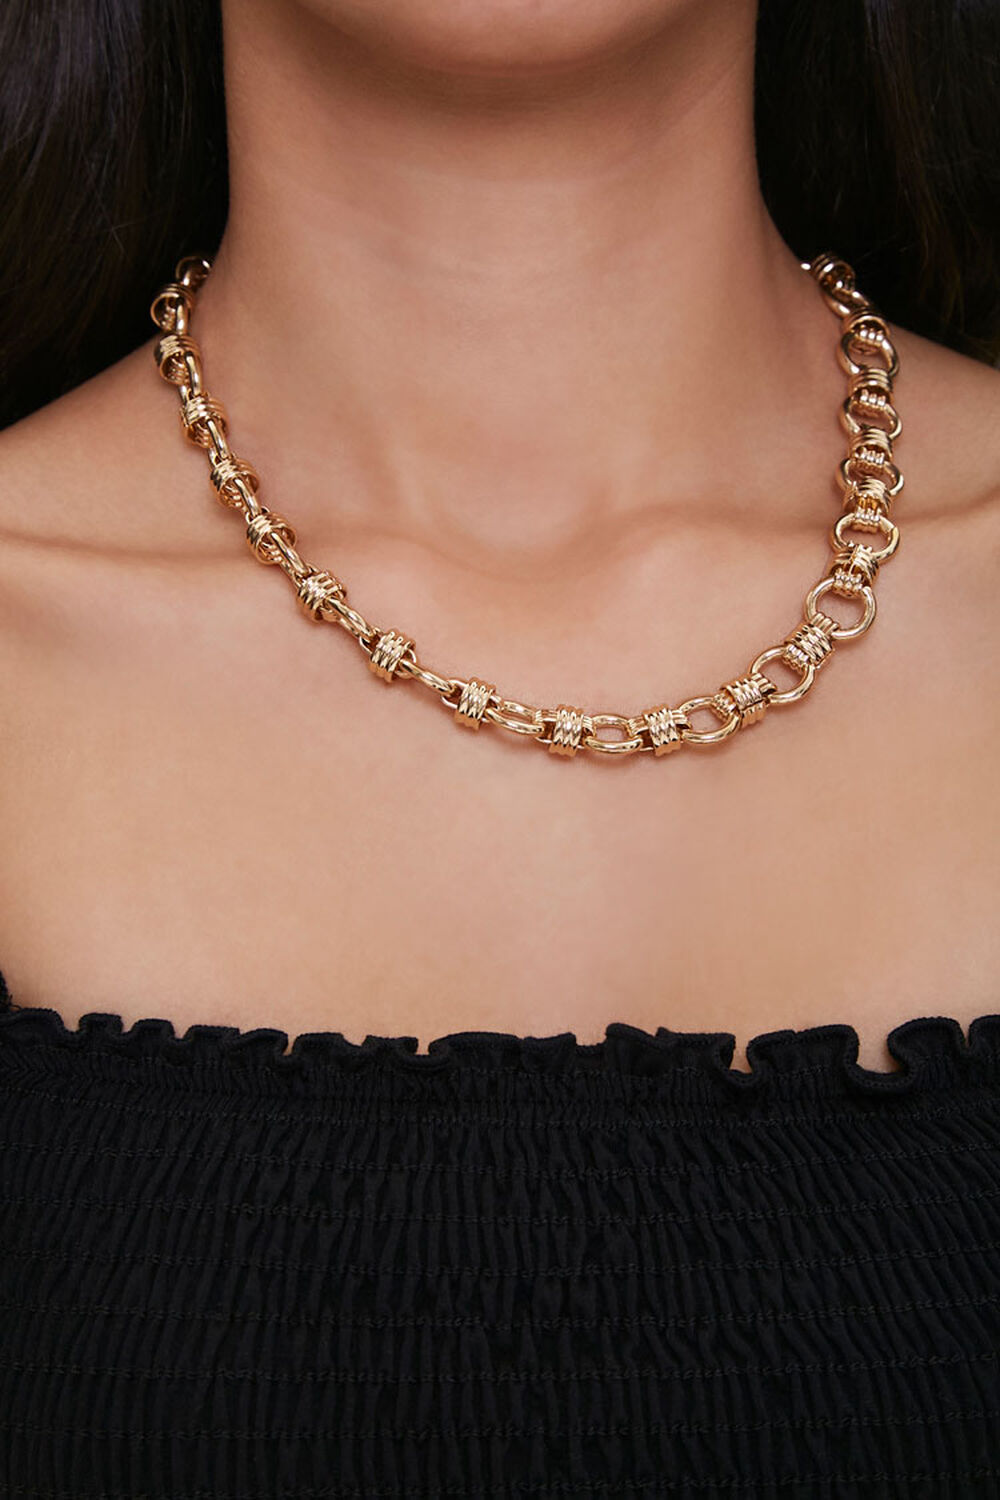 GOLD Chunky Chain Necklace, image 1